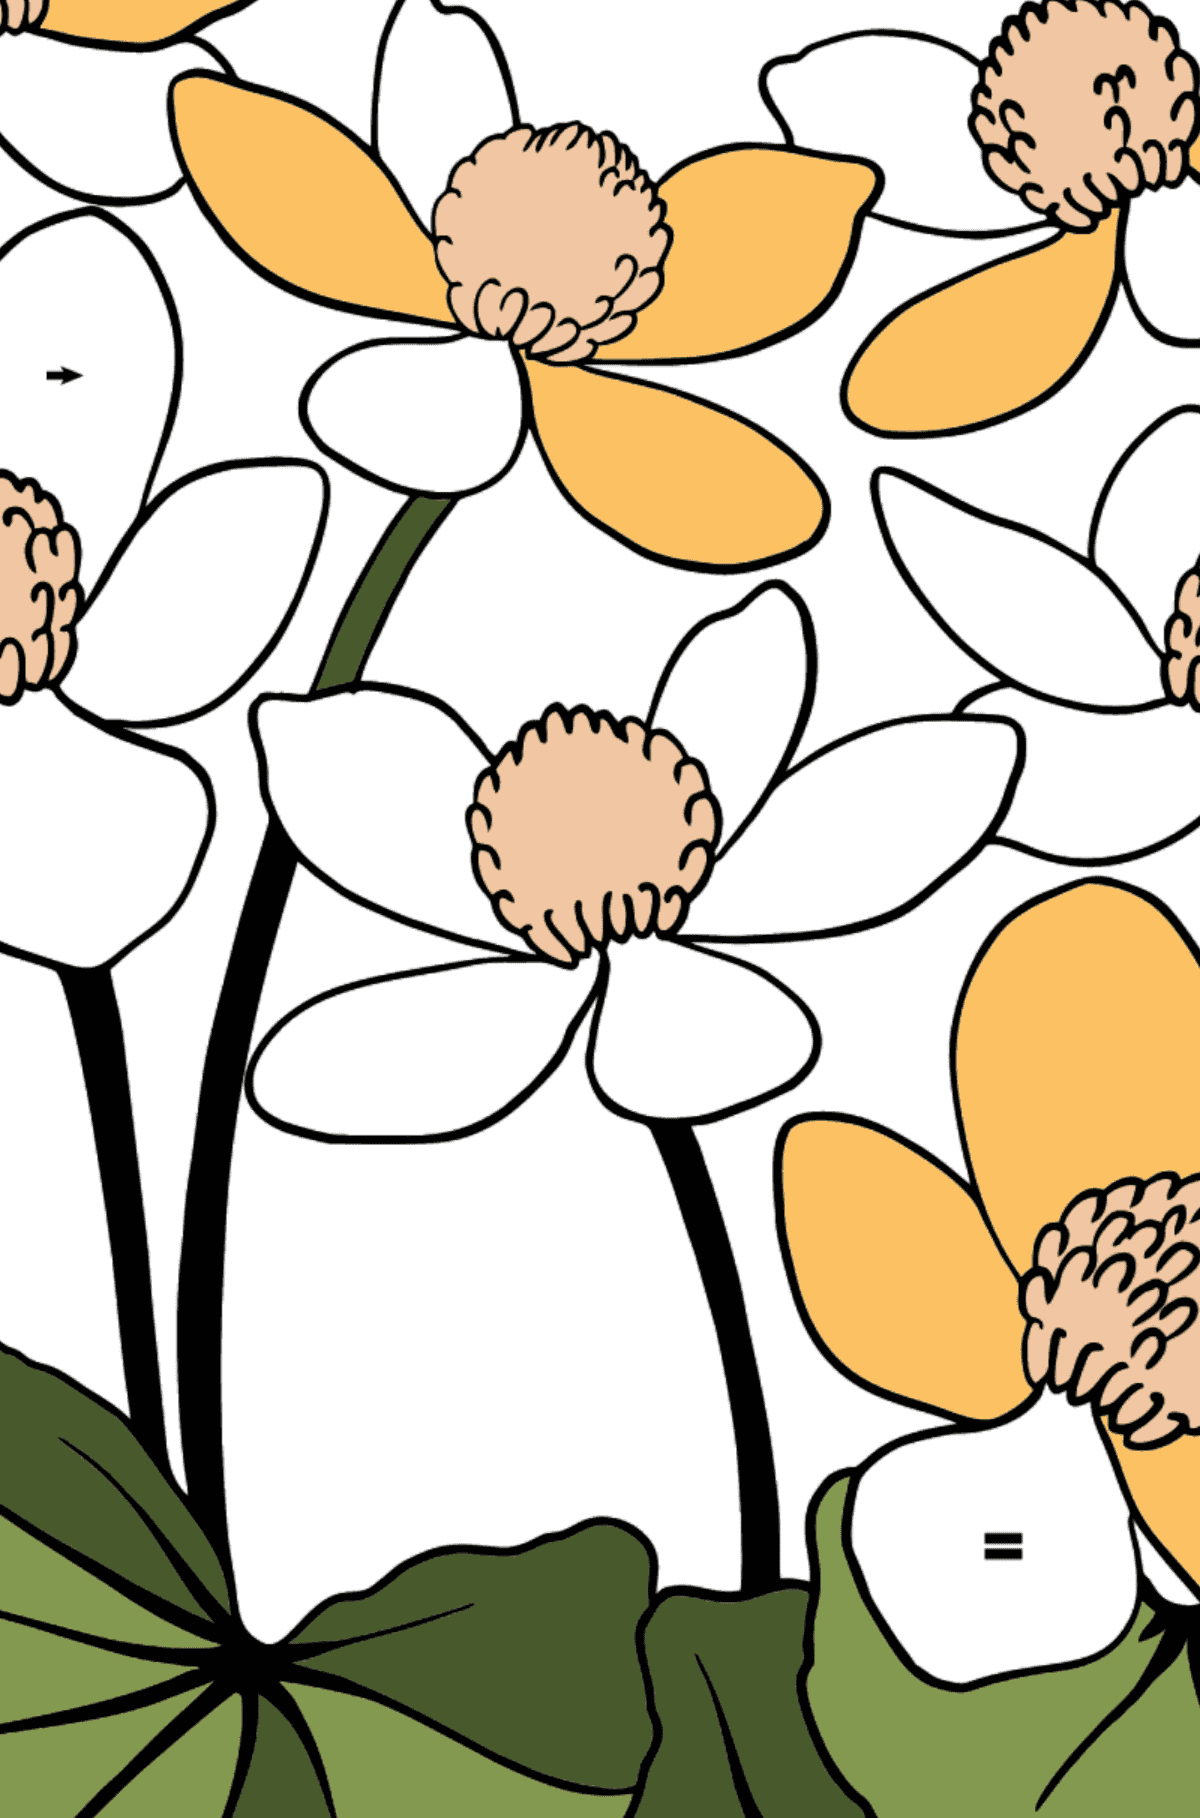 Coloring Page Yellow and Red Marsh Marigold - Coloring by Symbols for Kids